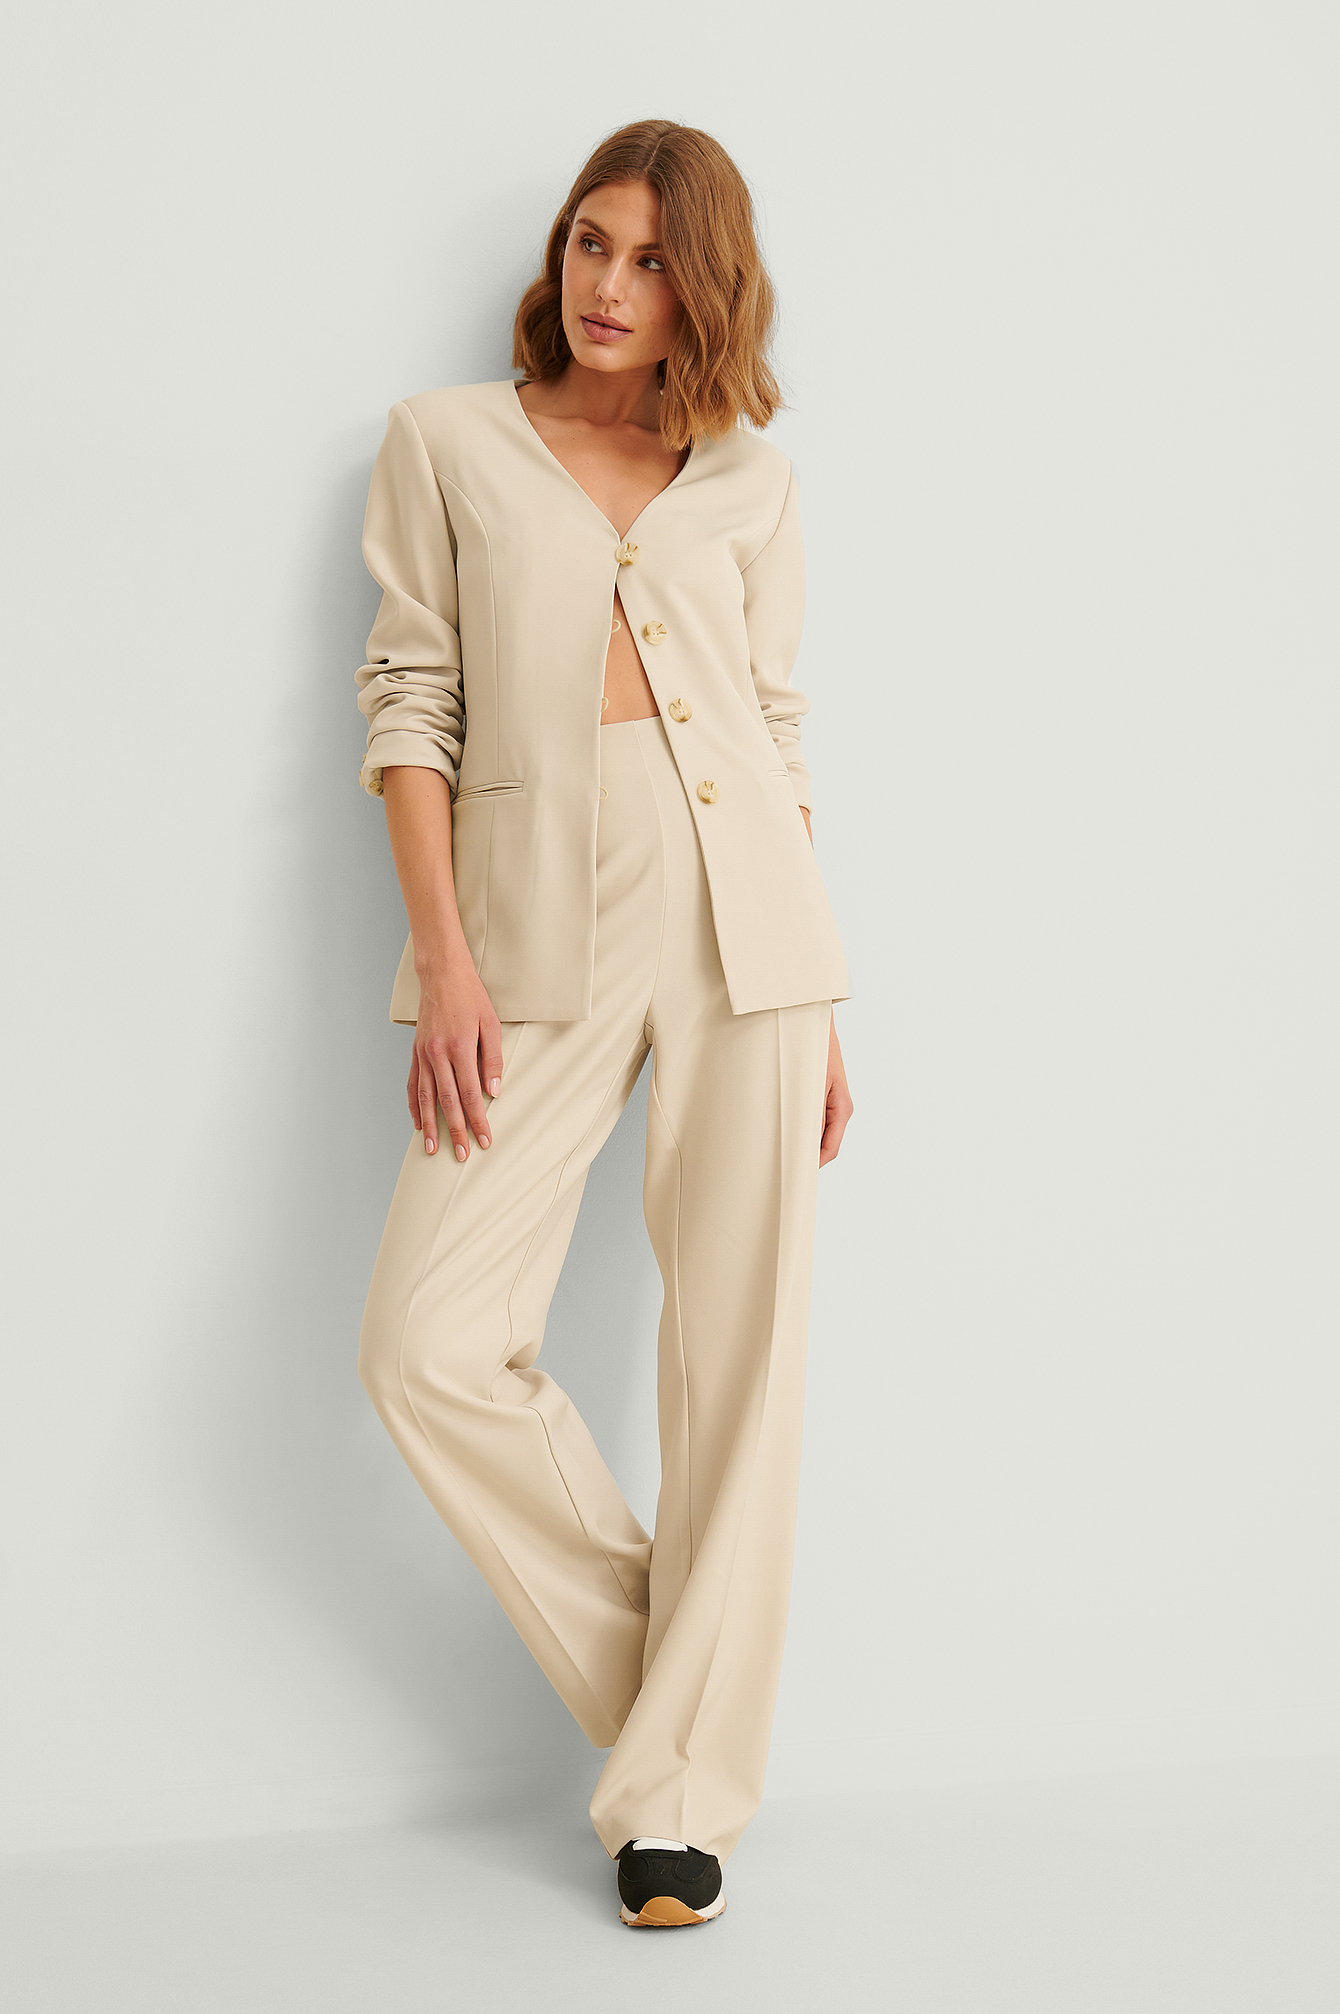 Recycled Tailored Suit Pants Outfit